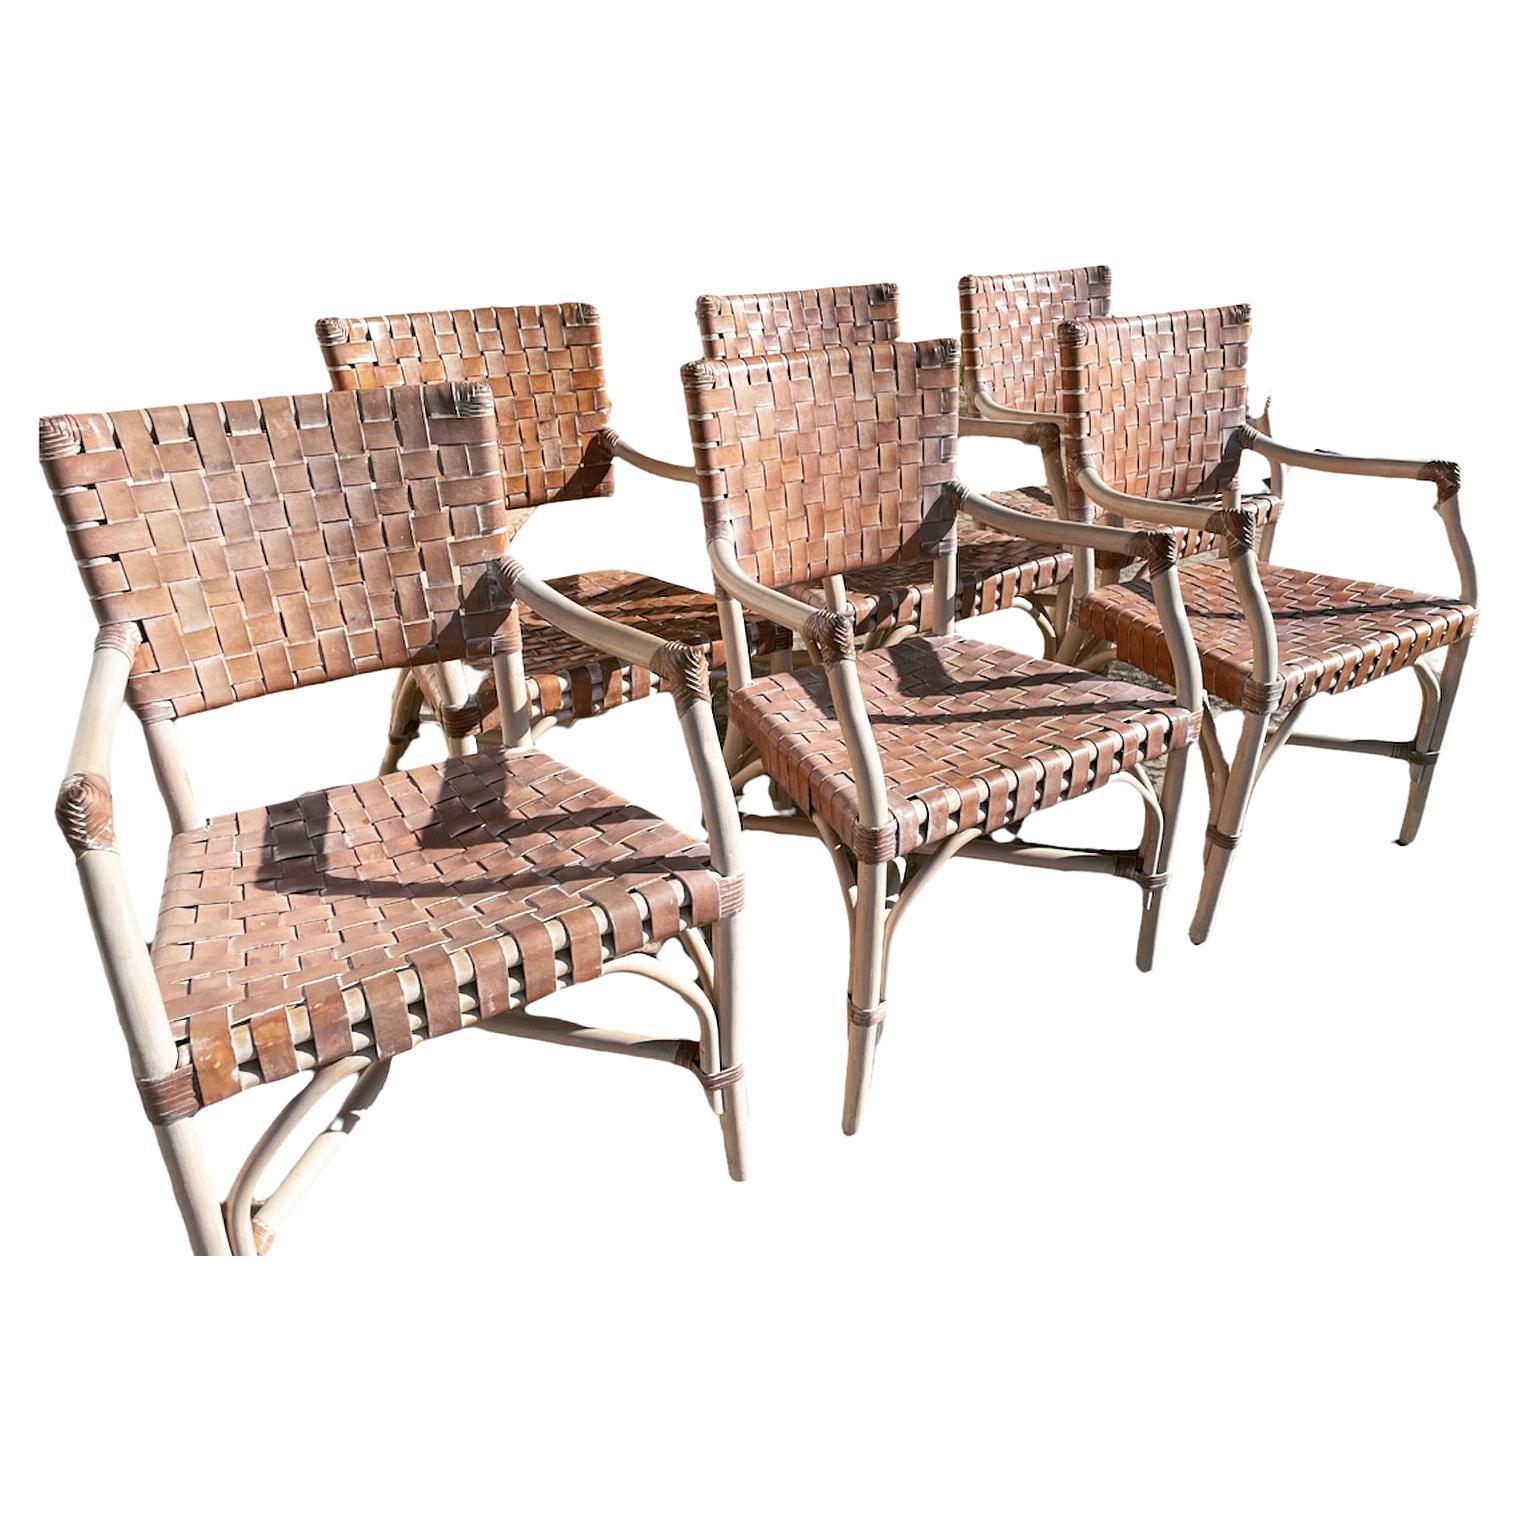 White washed bamboo with woven leather in style of Mcquire. Very cool directors style armchairs and very comfortable as well. Each piece is distressed with age and white wash with excellent joinery.